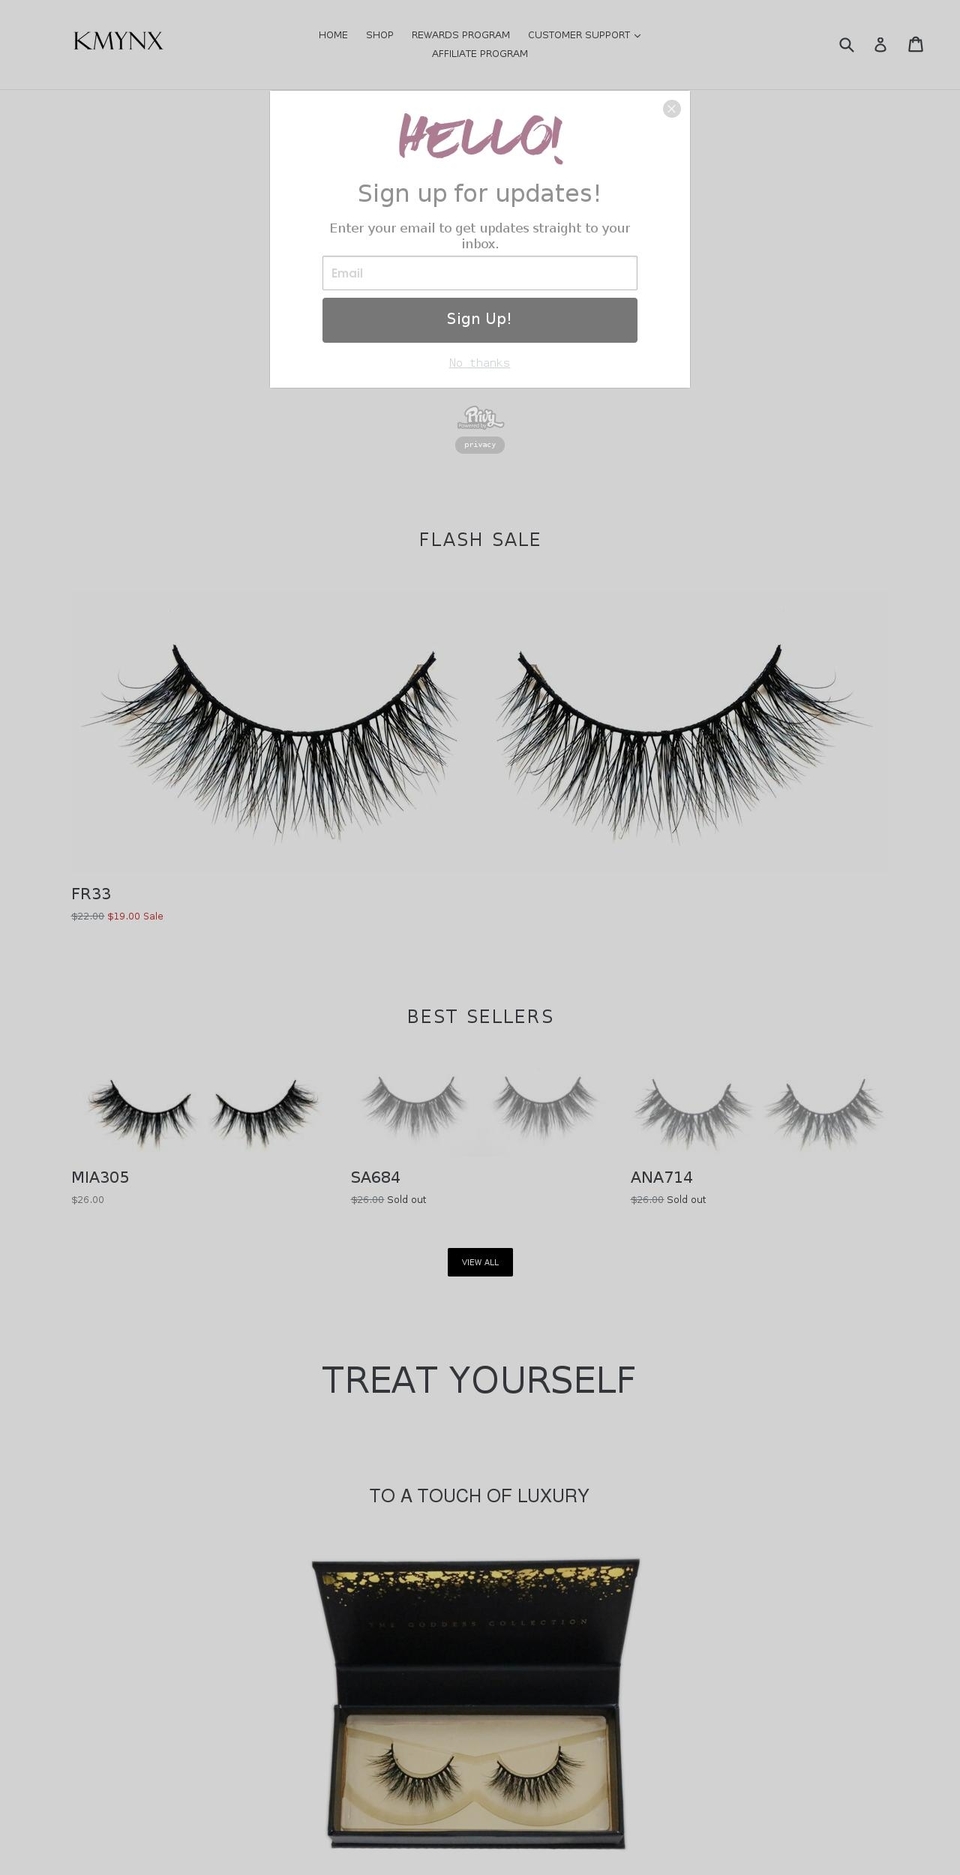 Copy of Debut Shopify theme site example kmynxlashes.com